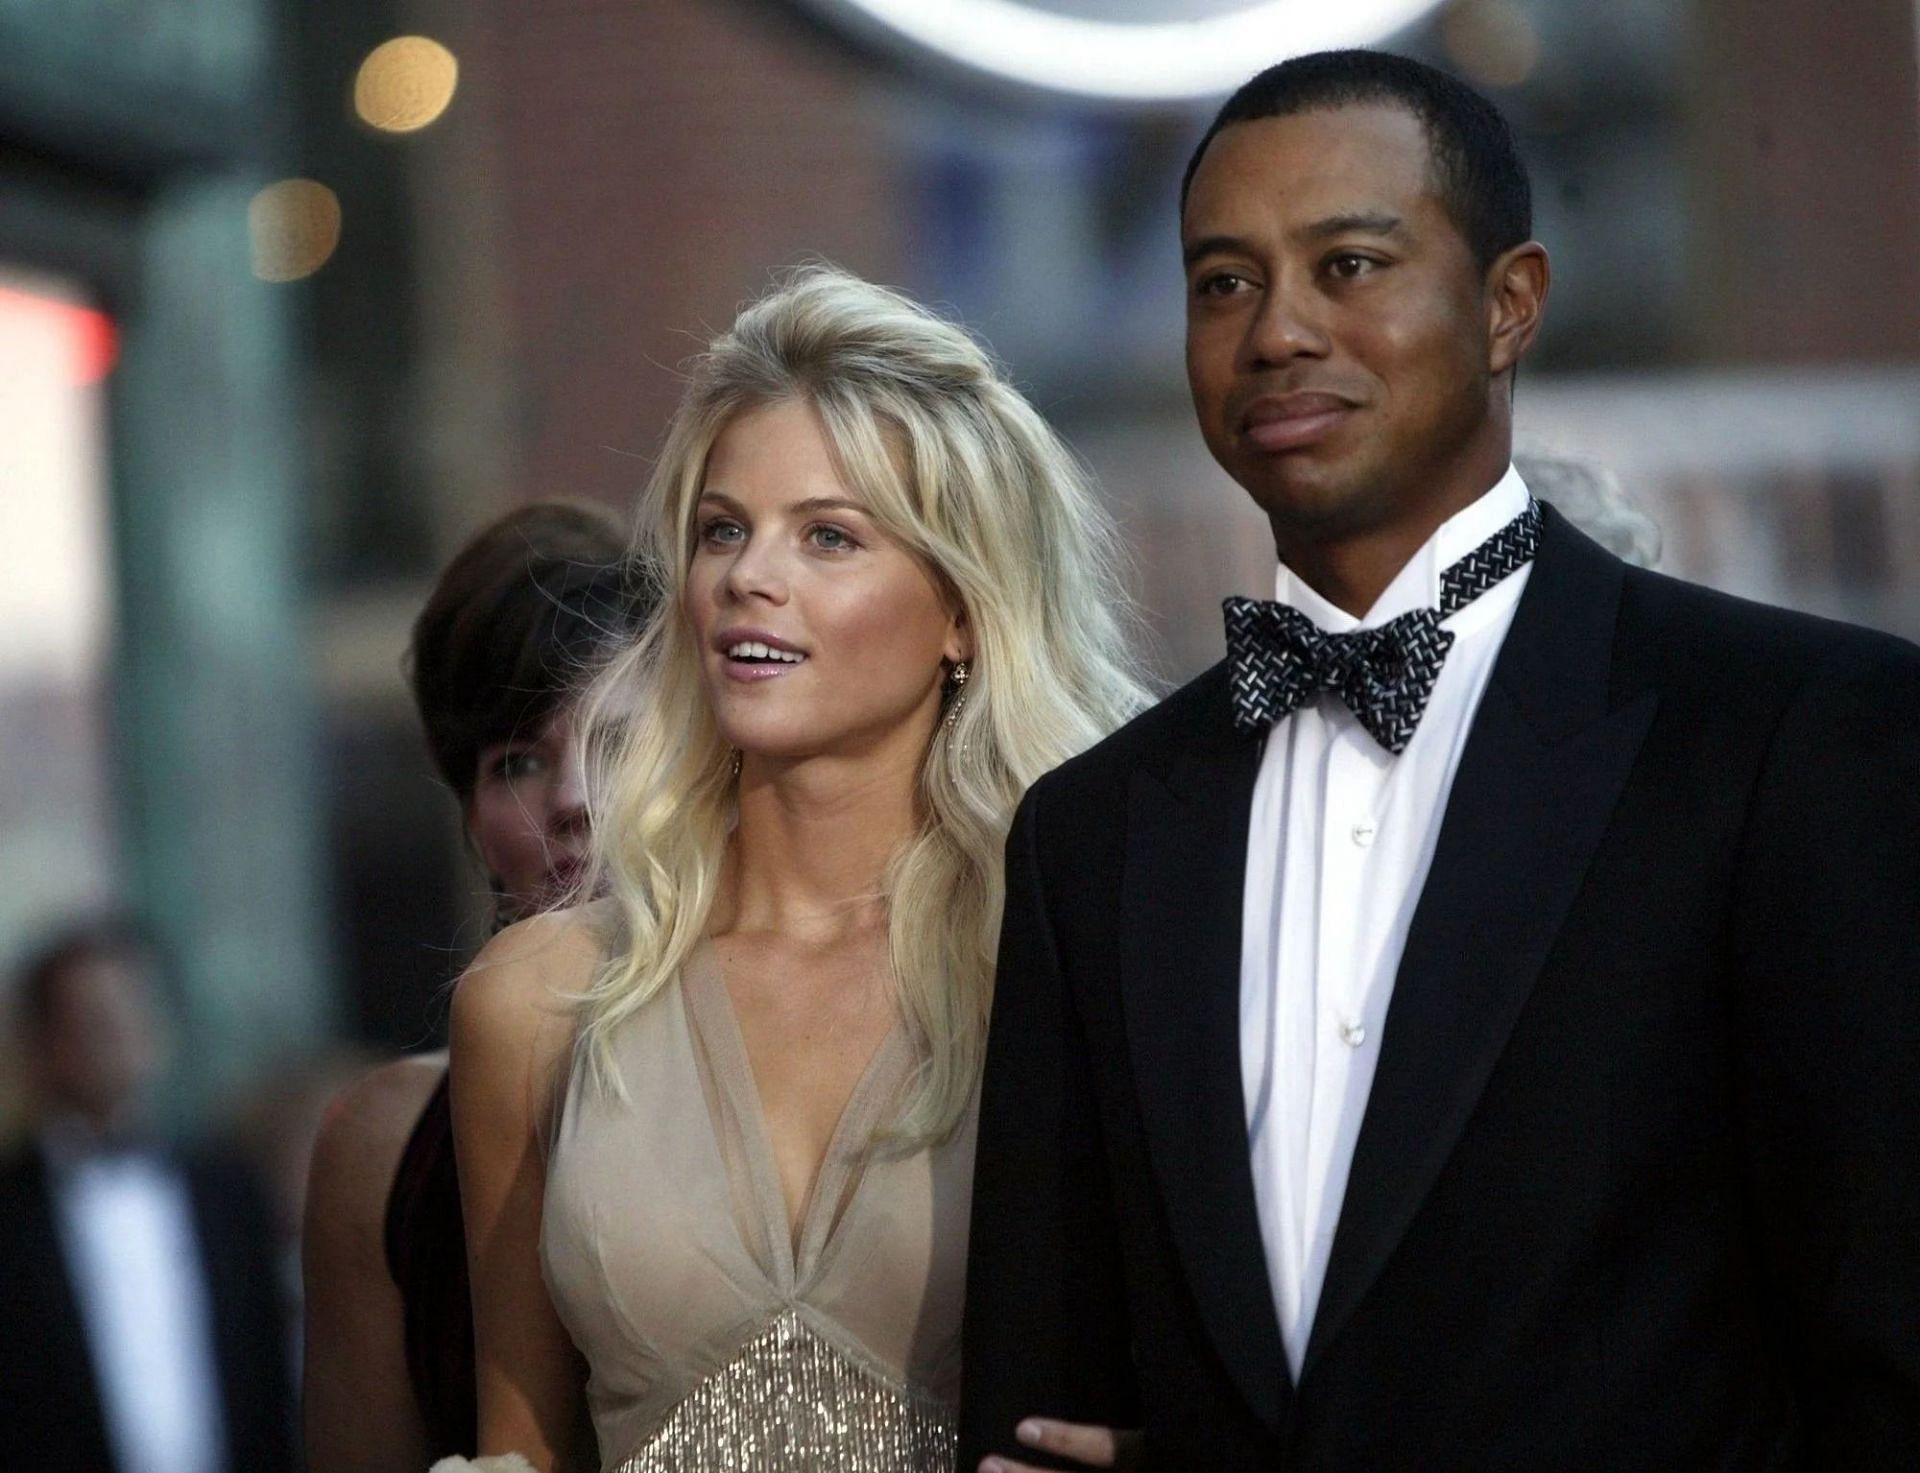 Elin Nordegren and Tiger Woods are in cordial relation since their divorce